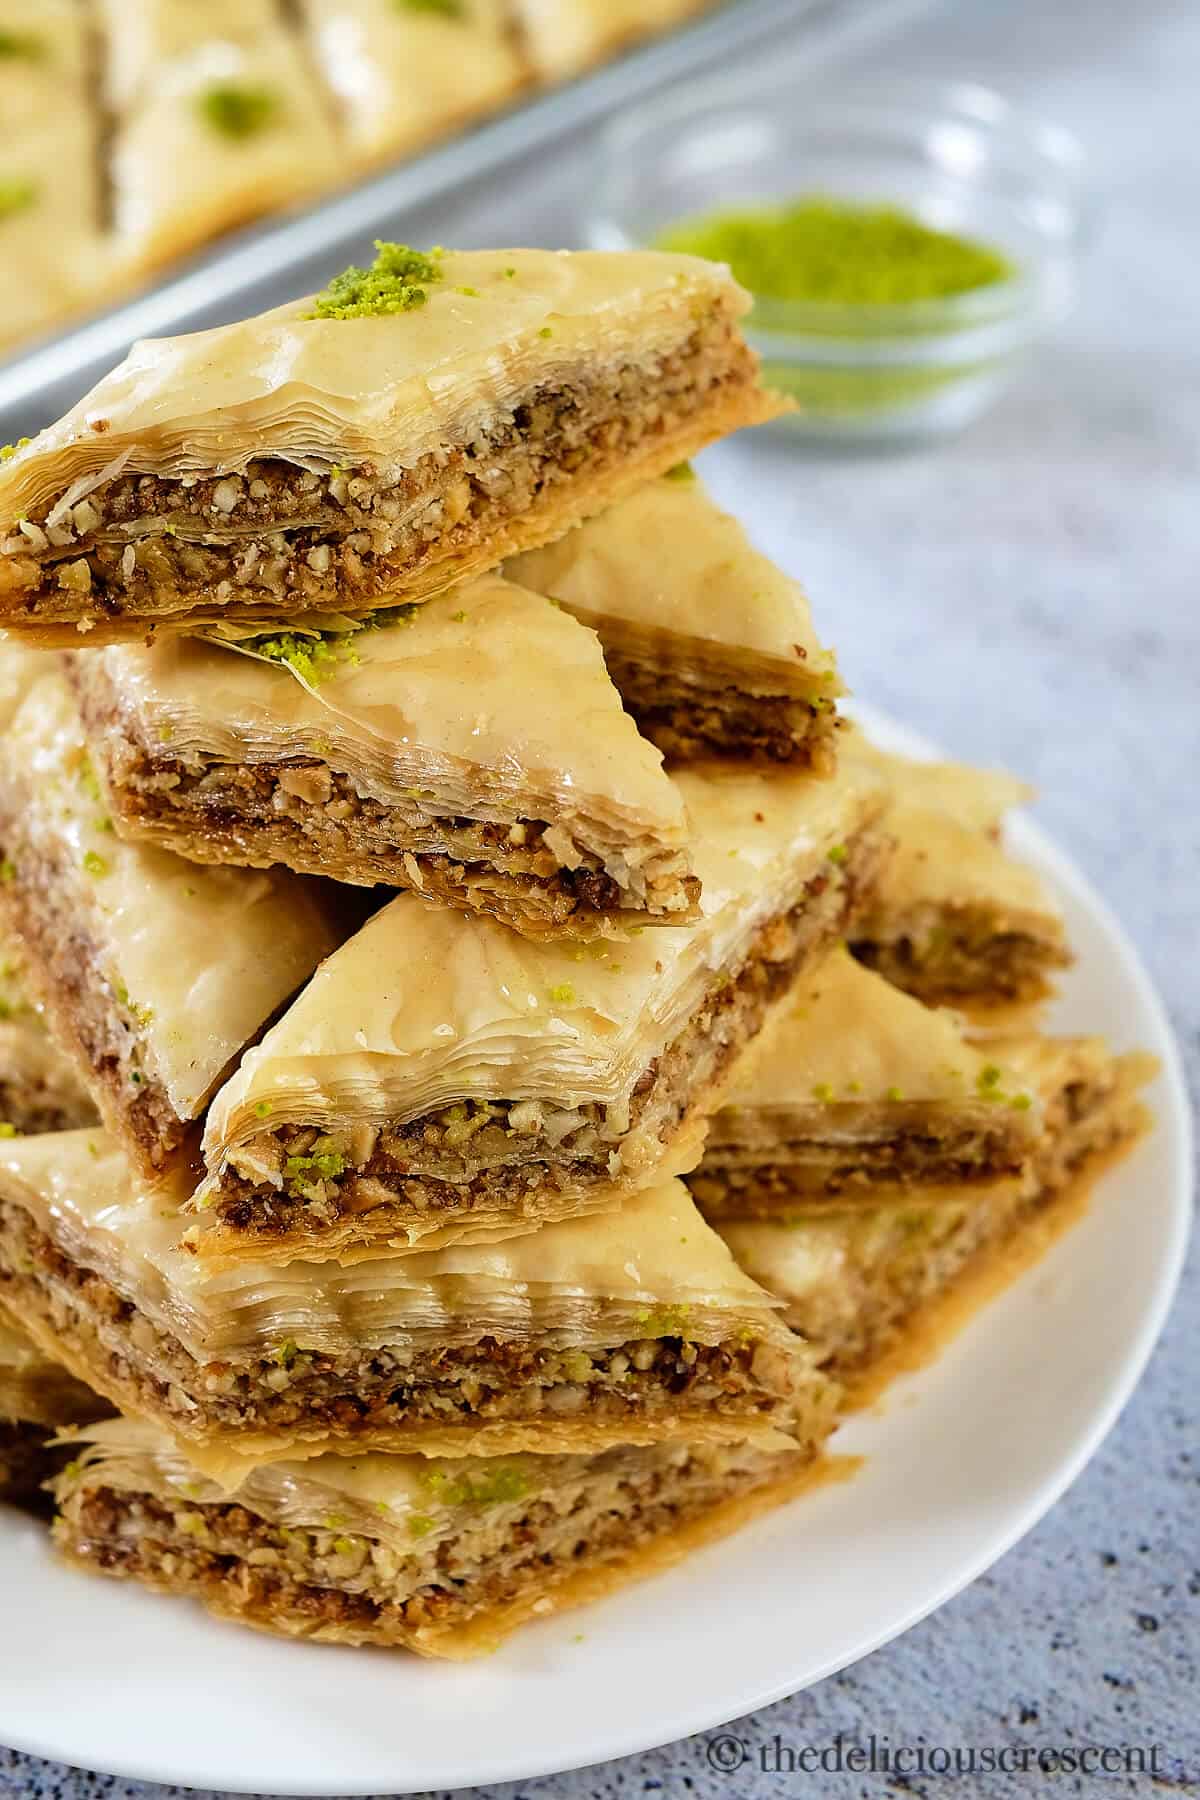 Baklava made with walnuts, almonds and honey served on a plate.